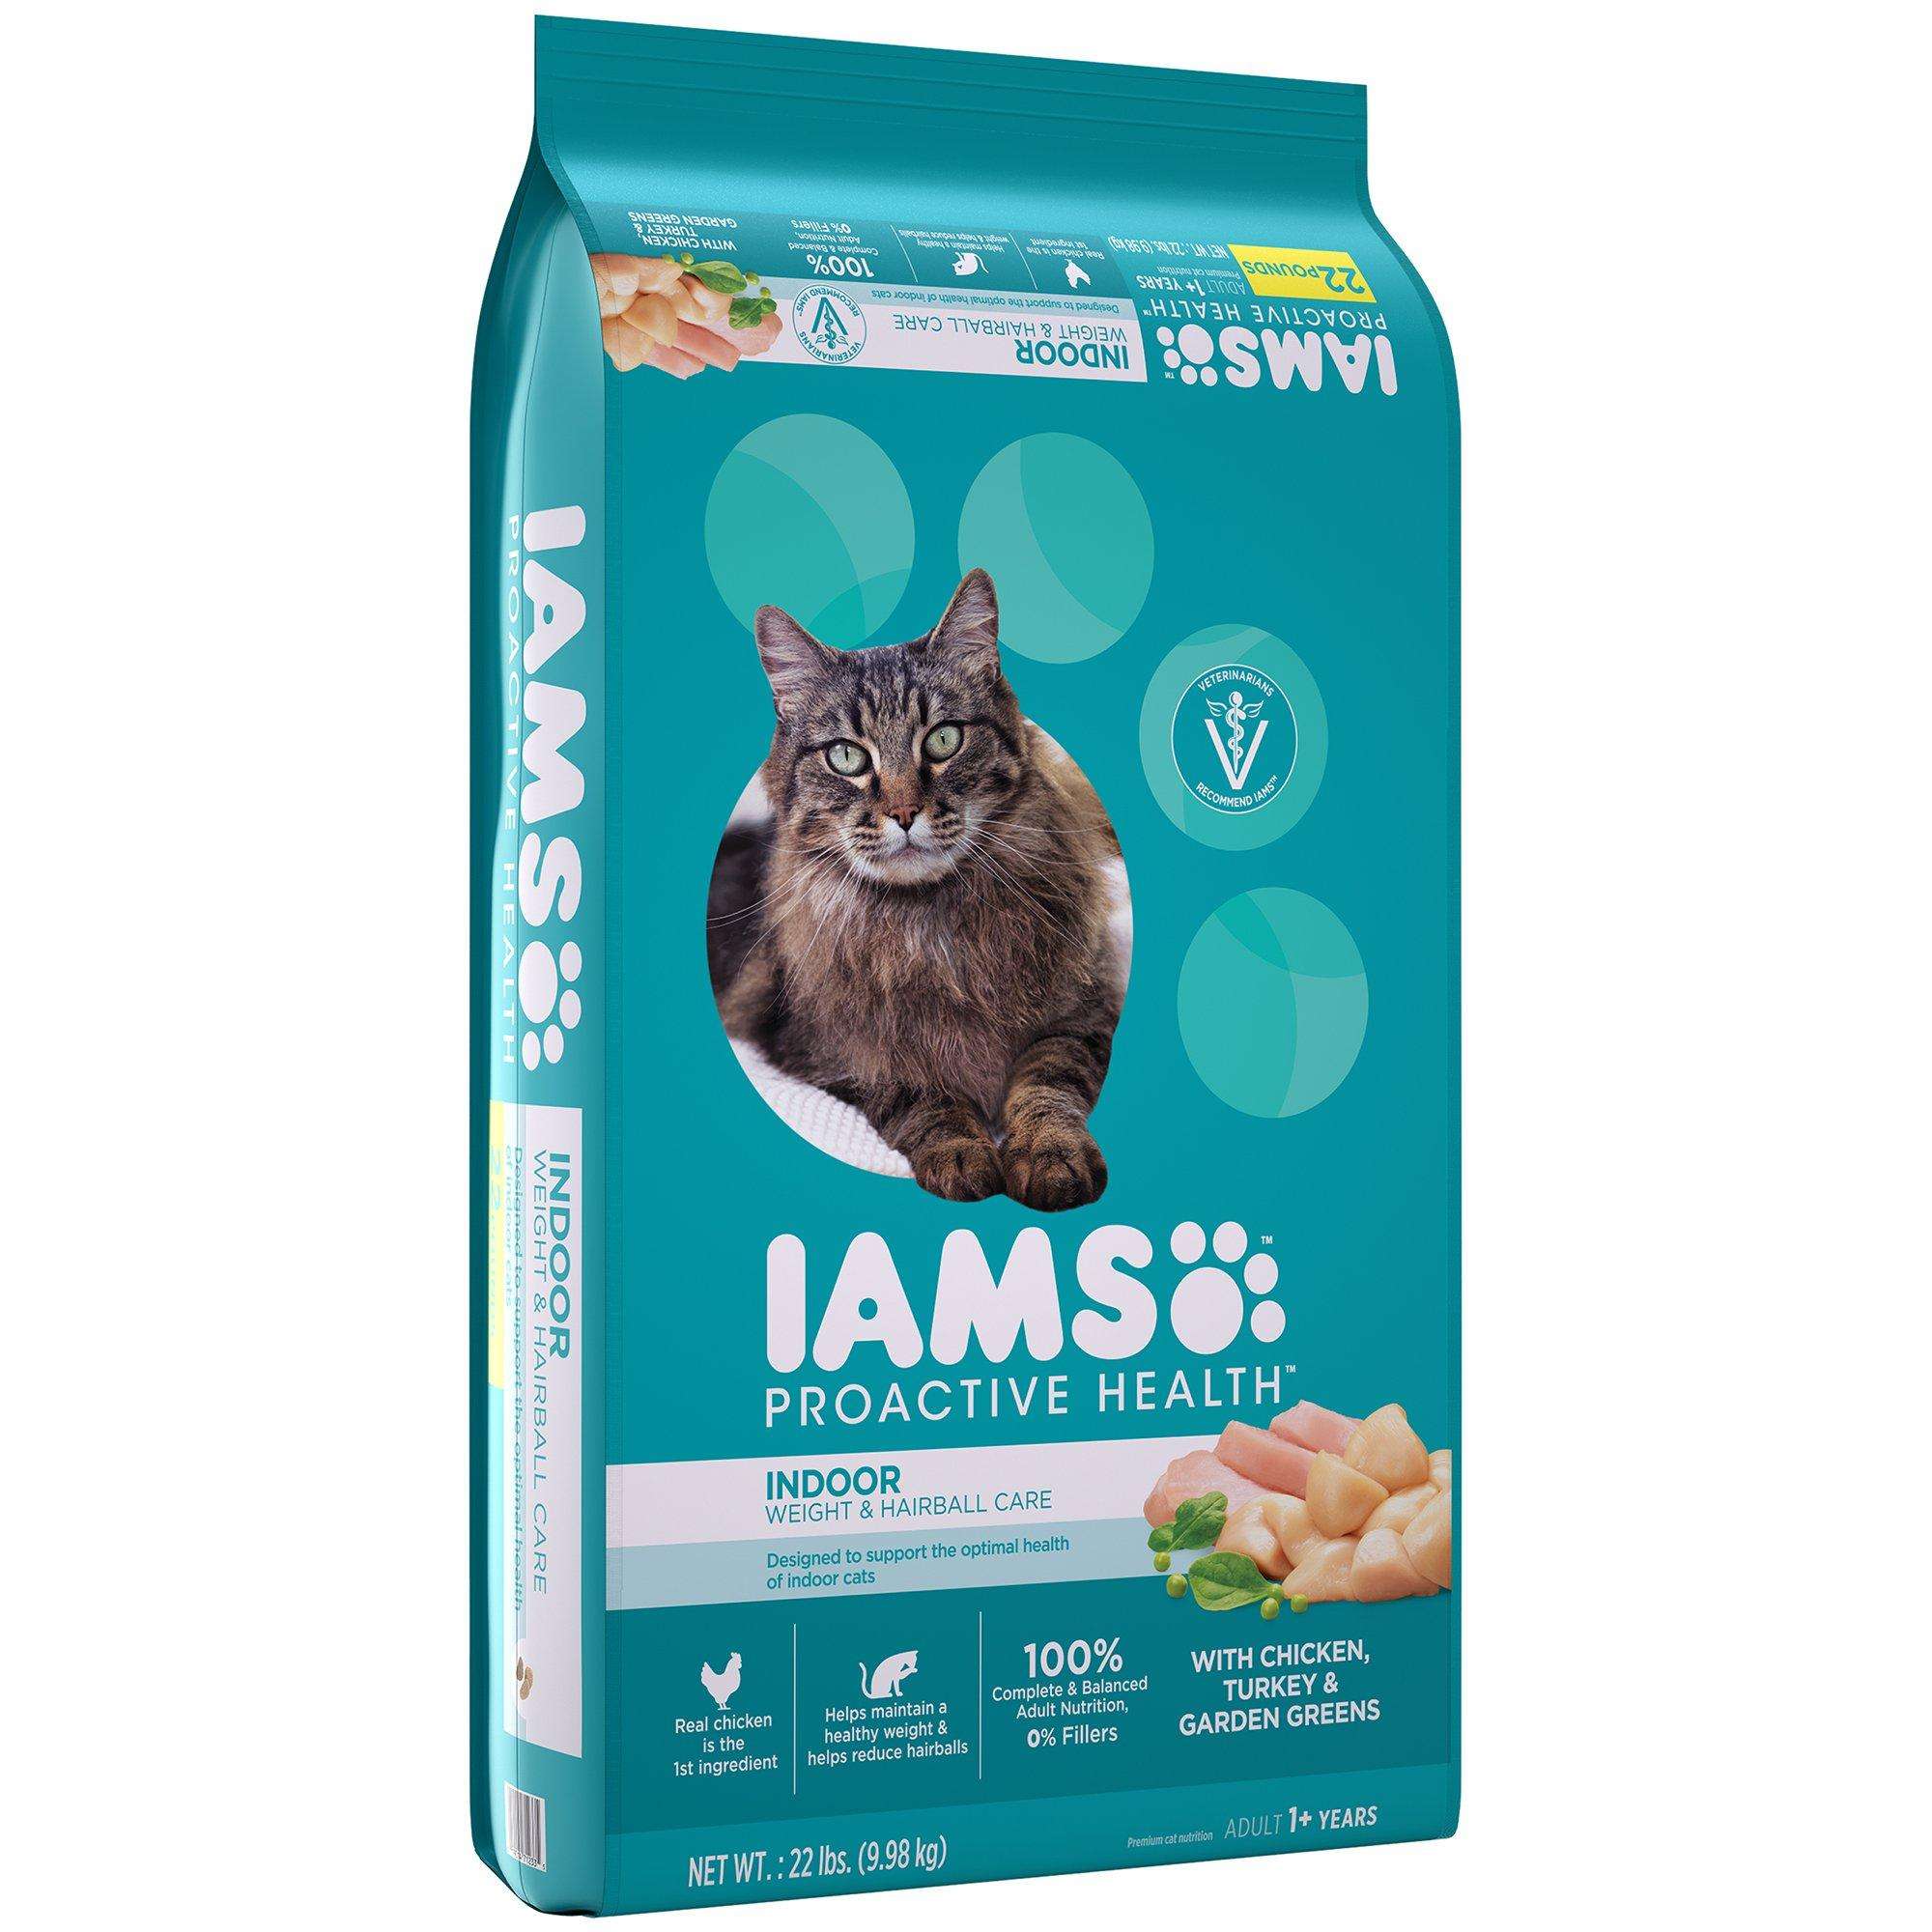 IAMS PROACTIVE HEALTH Indoor Weight and Hairball Care Dry Cat Food, (1 ...